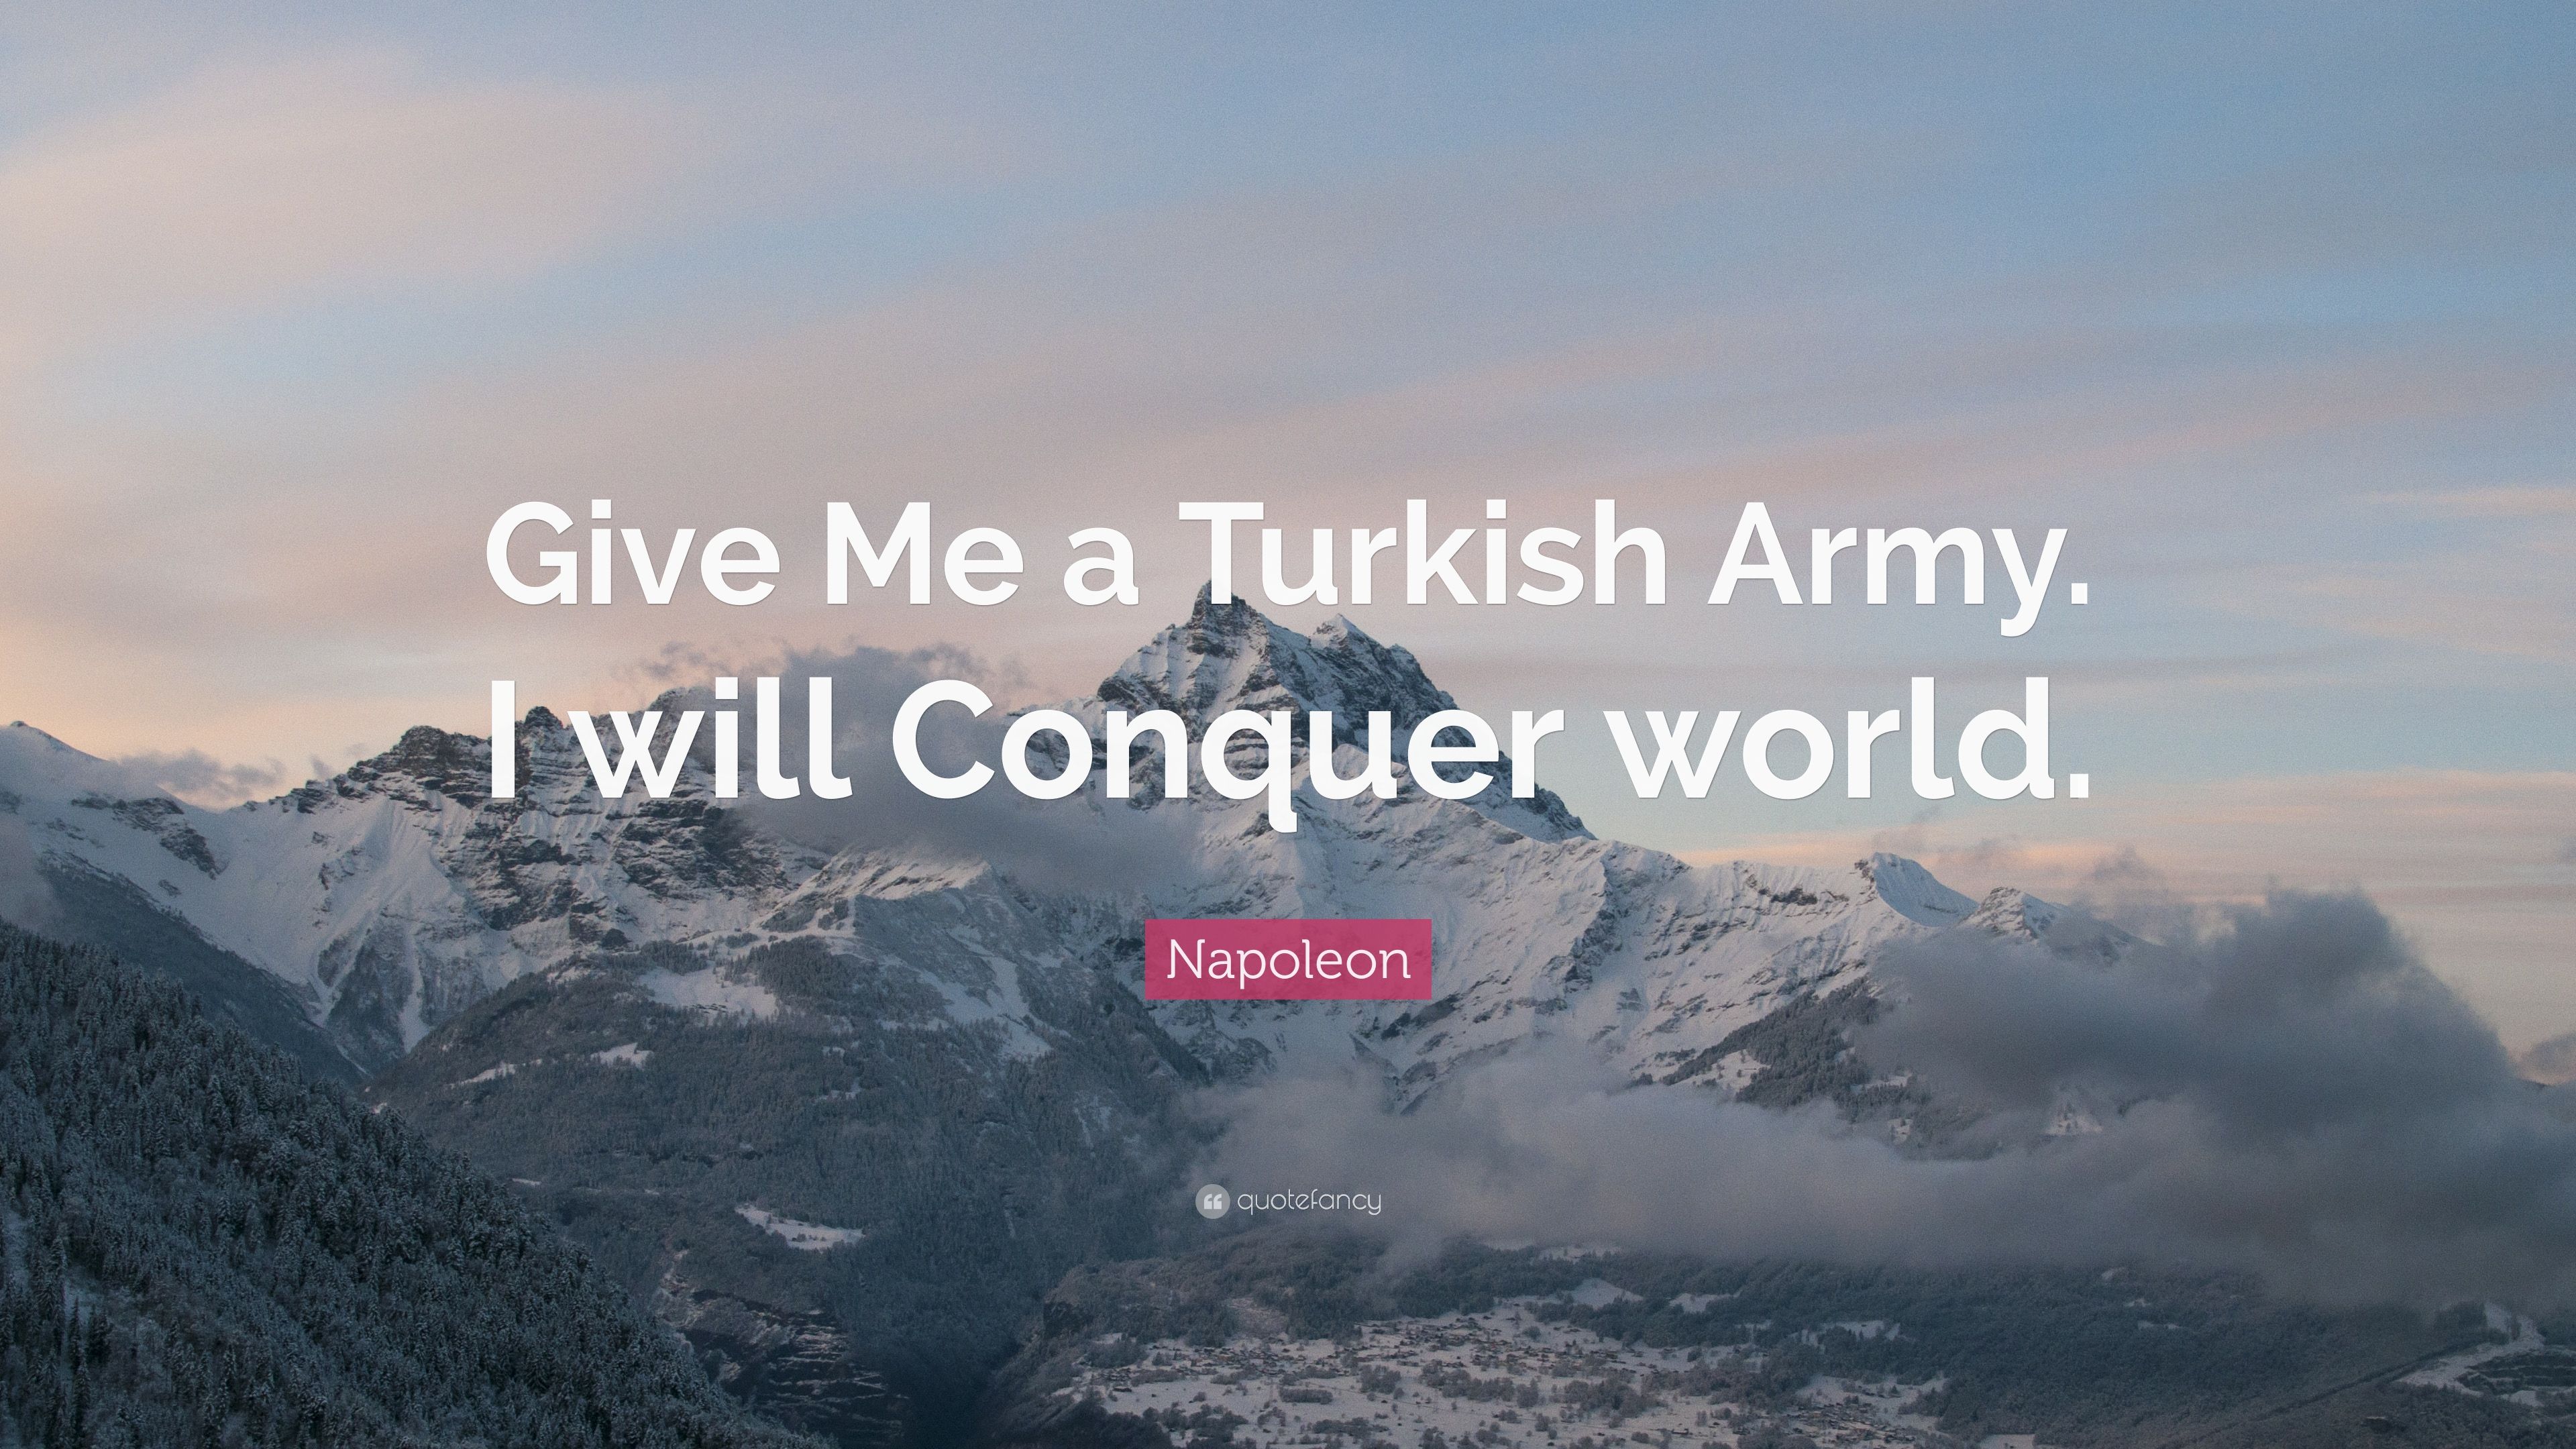 Napoleon Quote: “Give Me a Turkish Army. I will Conquer world.” (12 wallpaper)